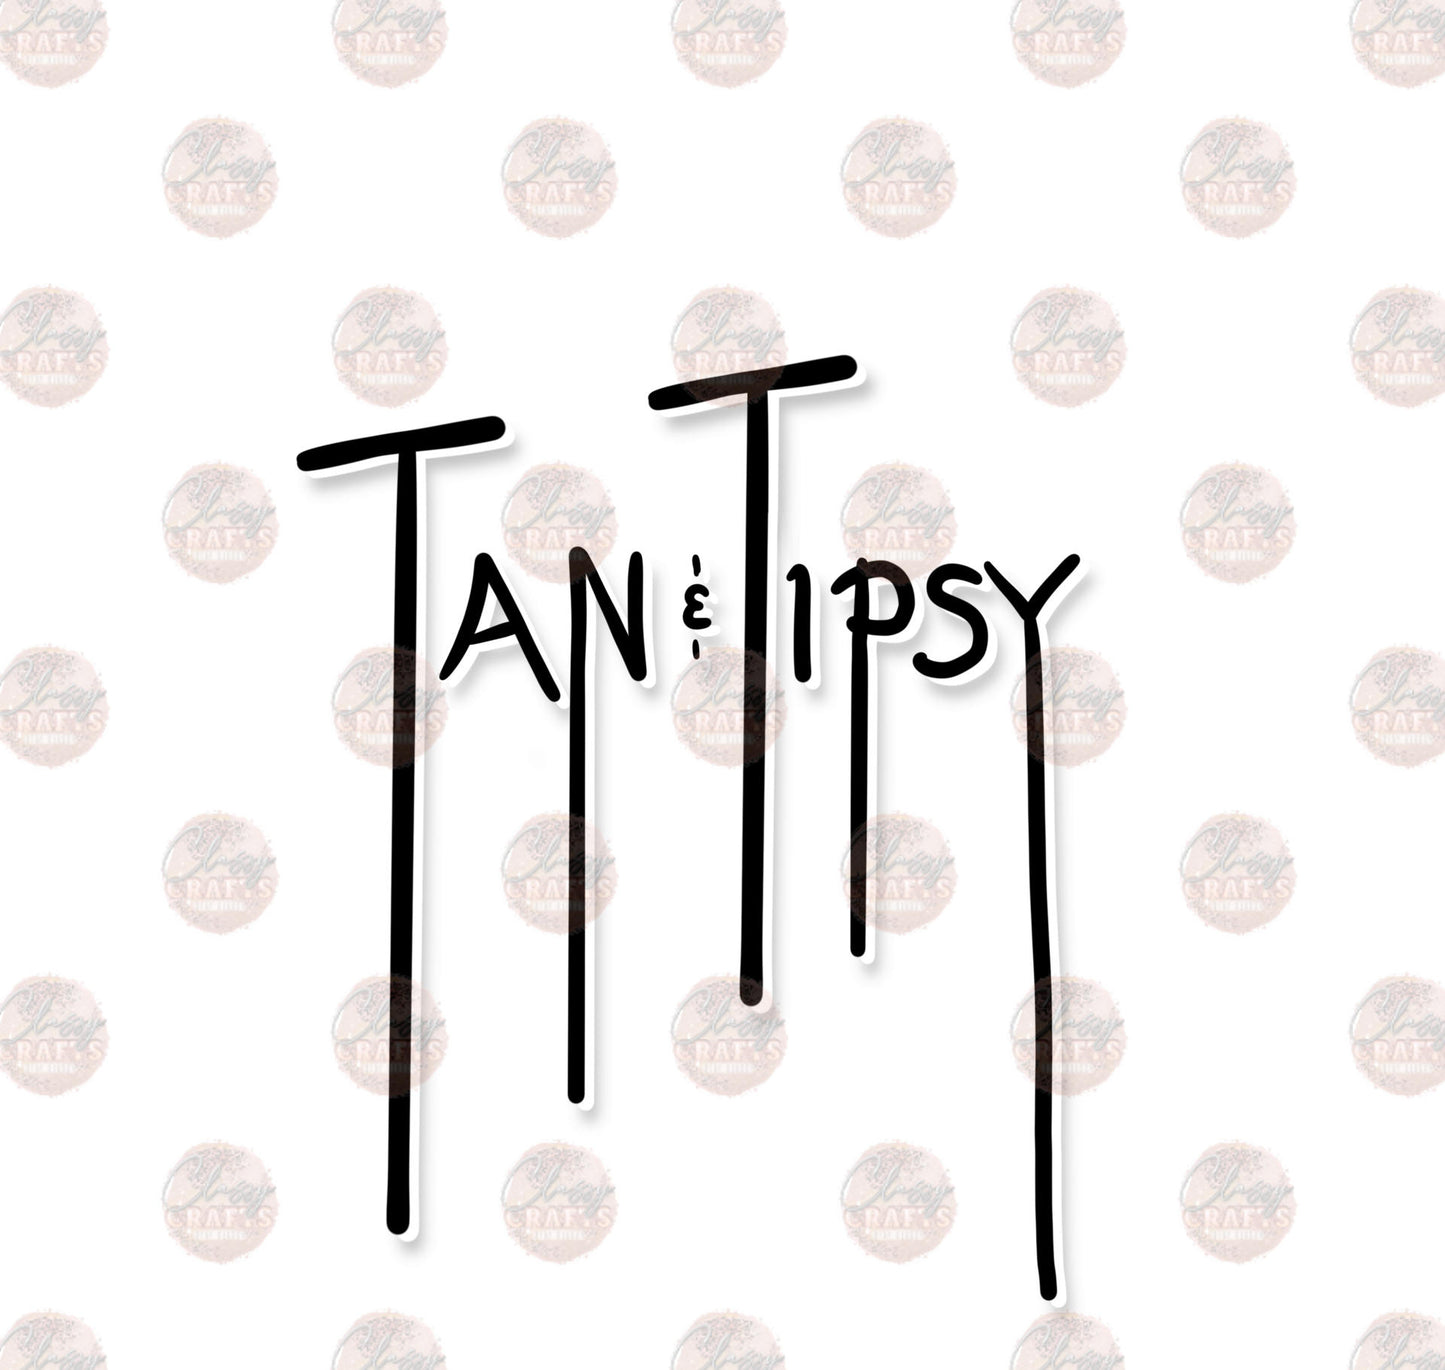 Tan & Tipsy Outlined - Sublimation Transfer